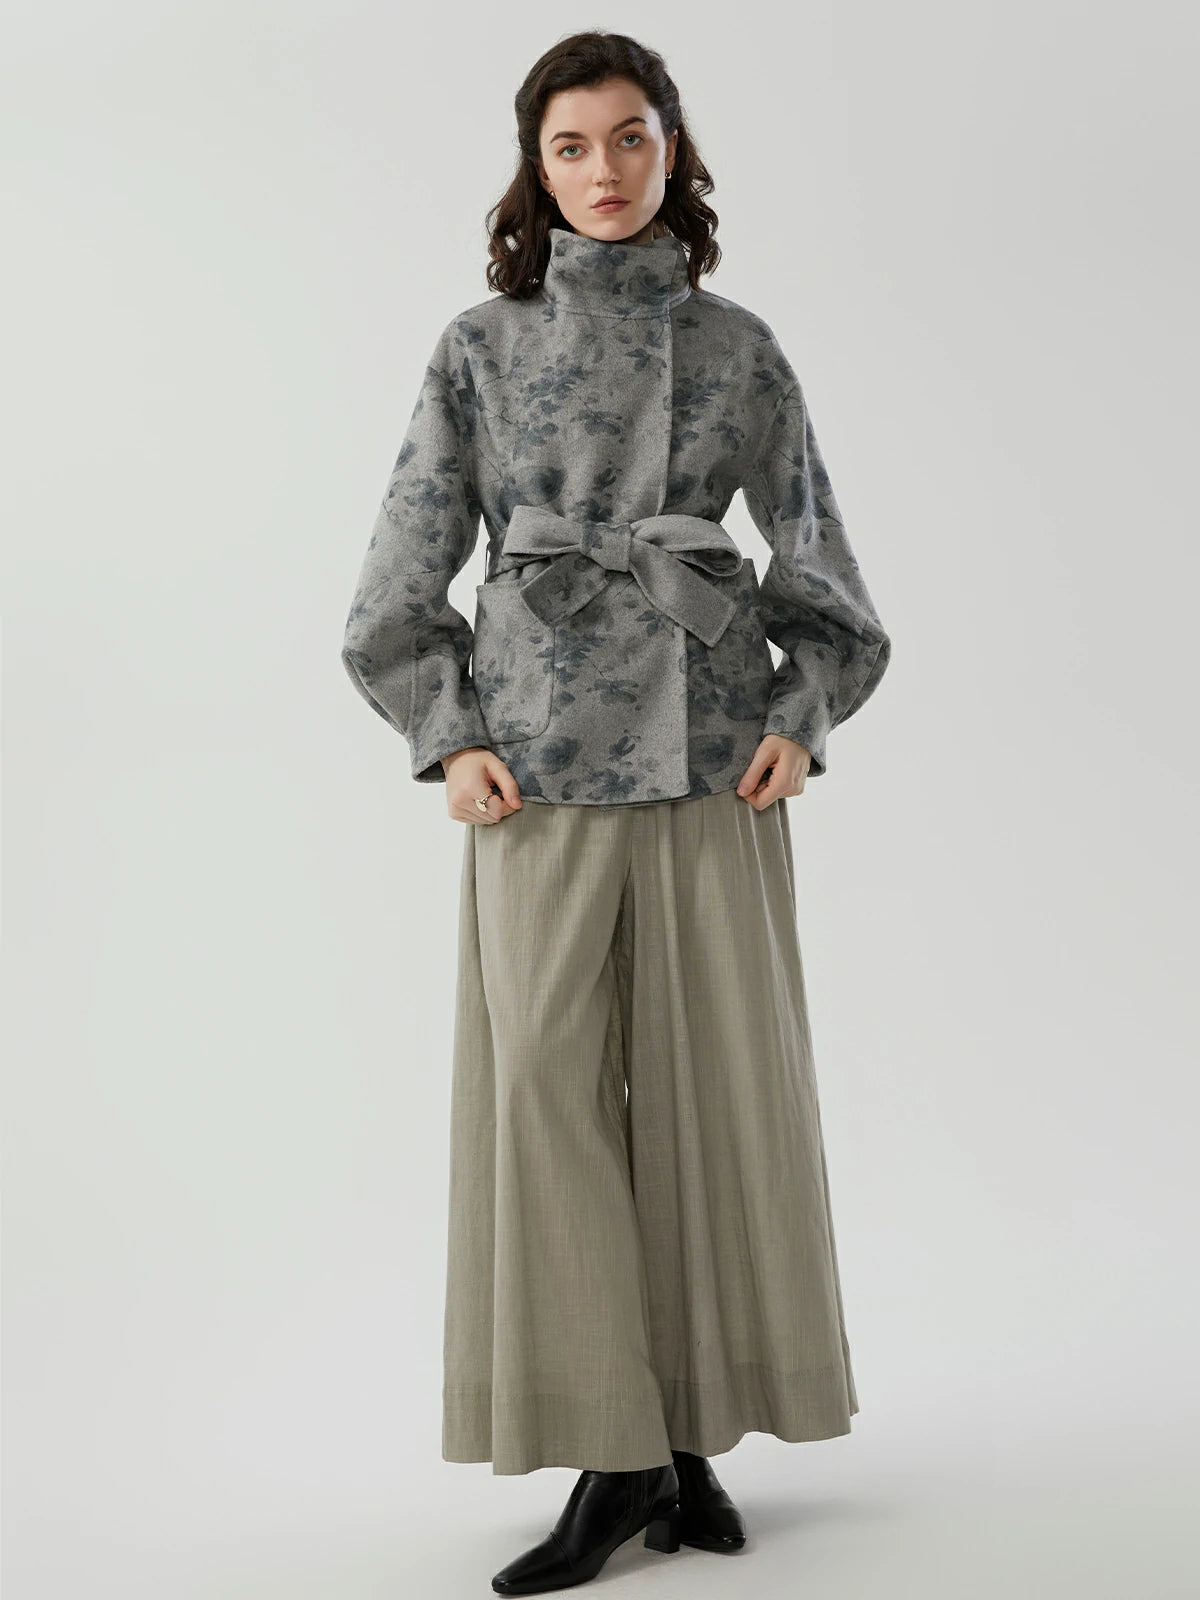 High-quality fabric collared jacket with lantern sleeves and grey printed pattern for fashionable women&#39;s wear